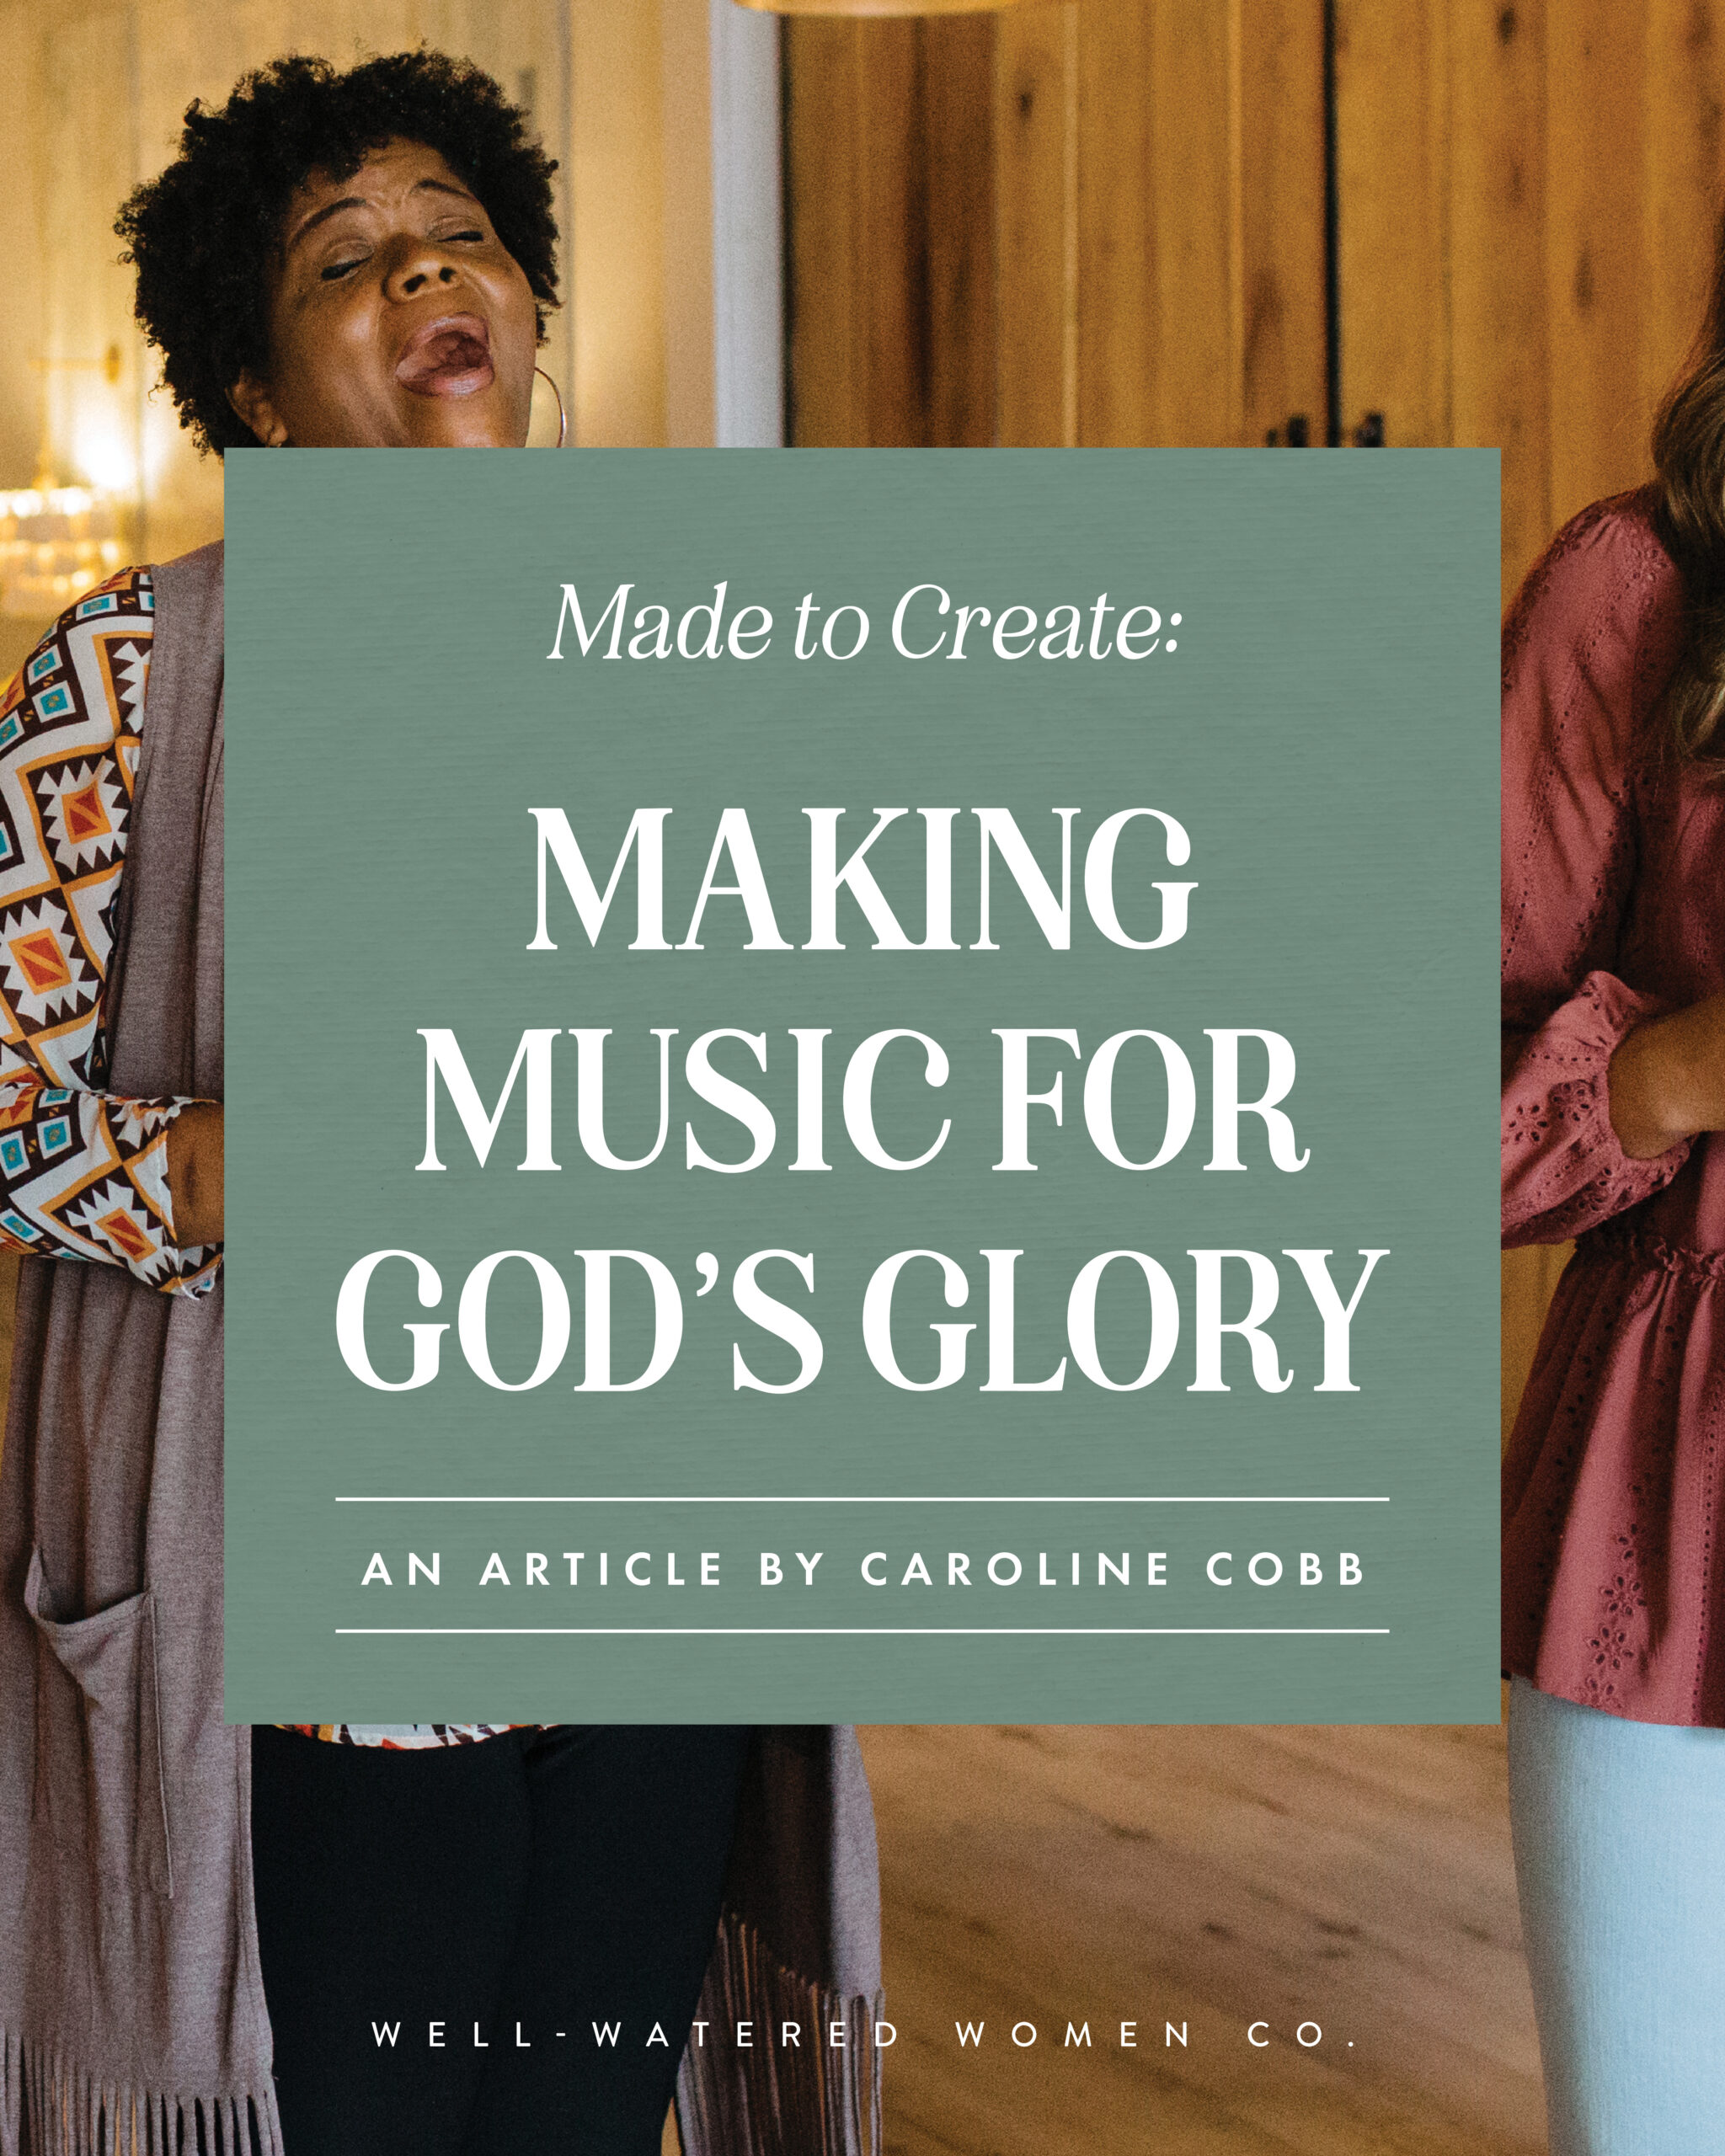 Making Music for God's Glory - an article from Well-Watered Women